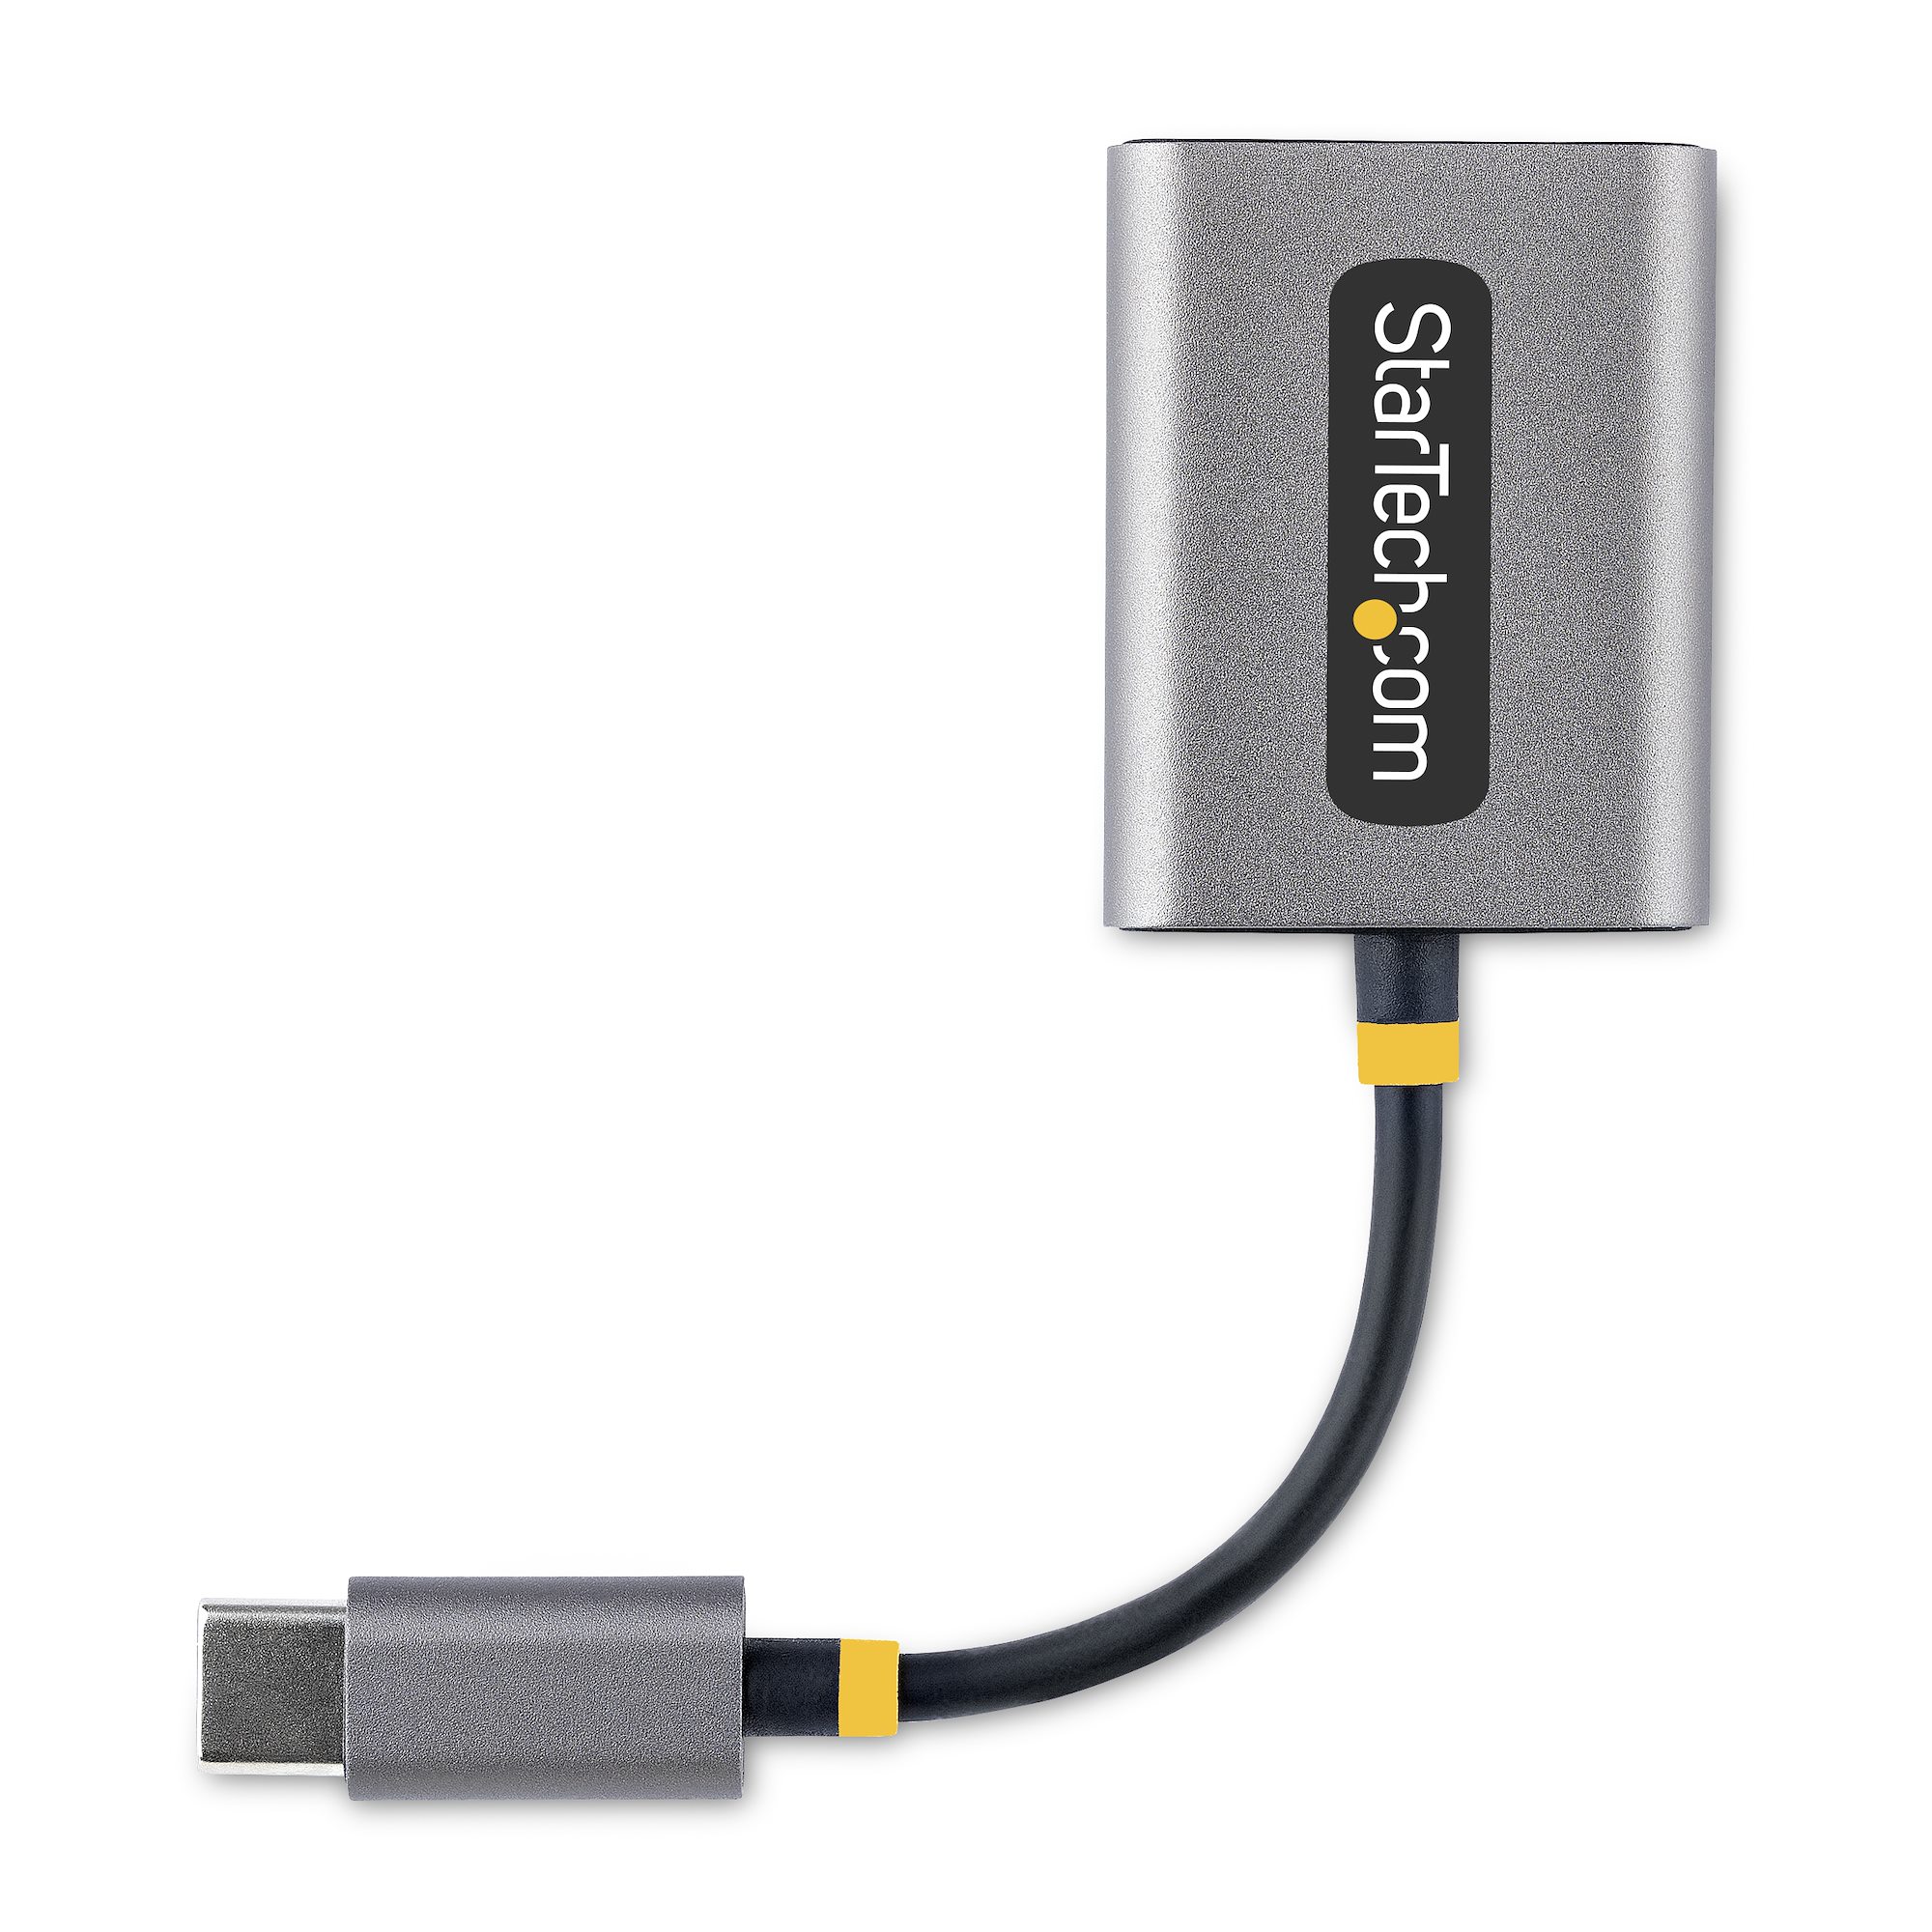 Aux Line-In Adapter: 3.5mm to USB-C